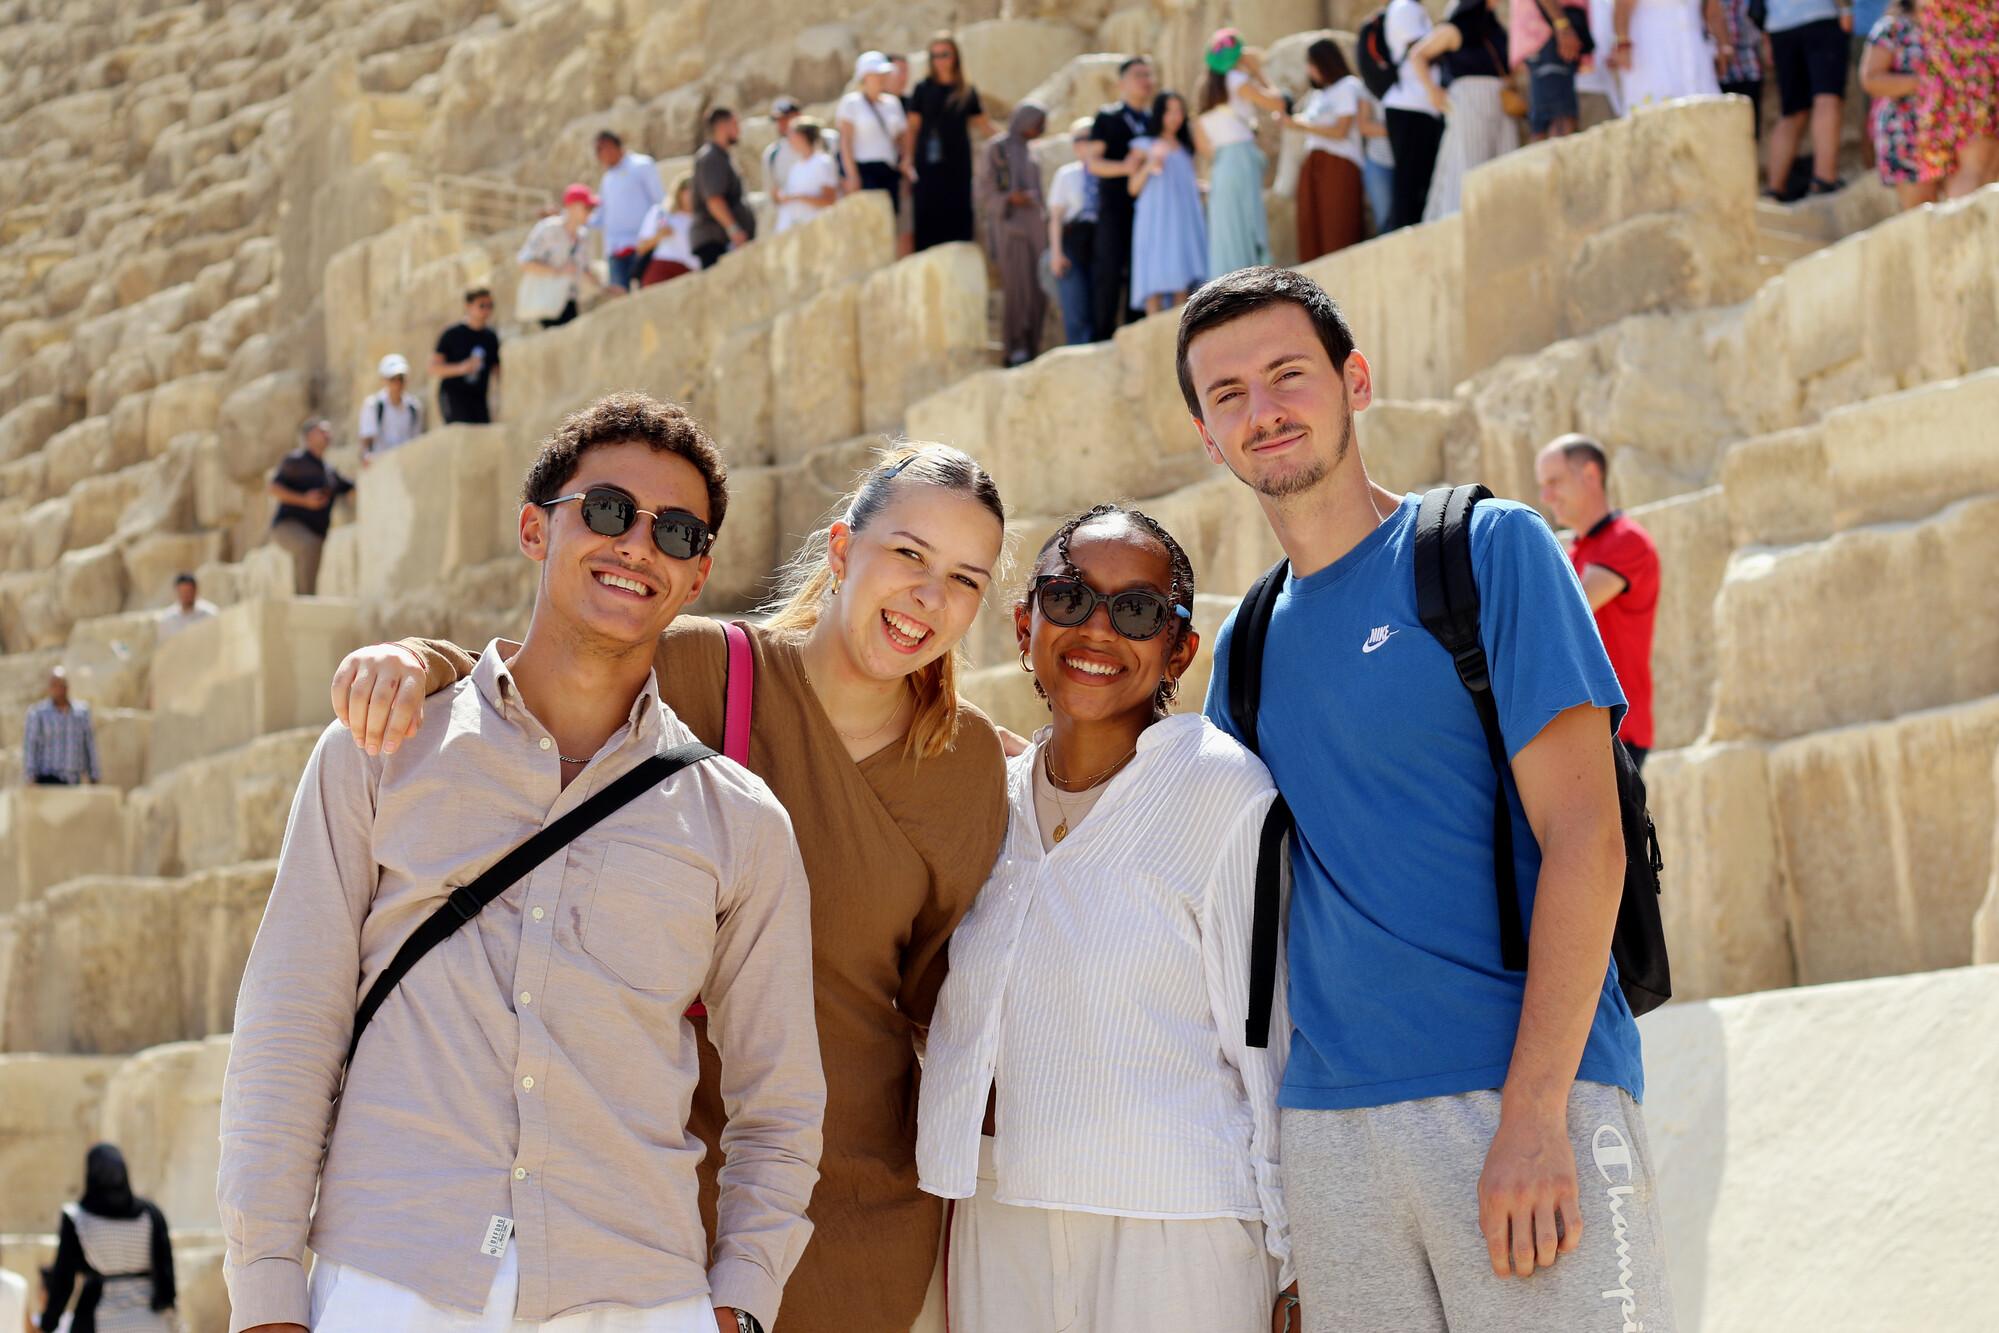 group photo of students at the pyramids field trip